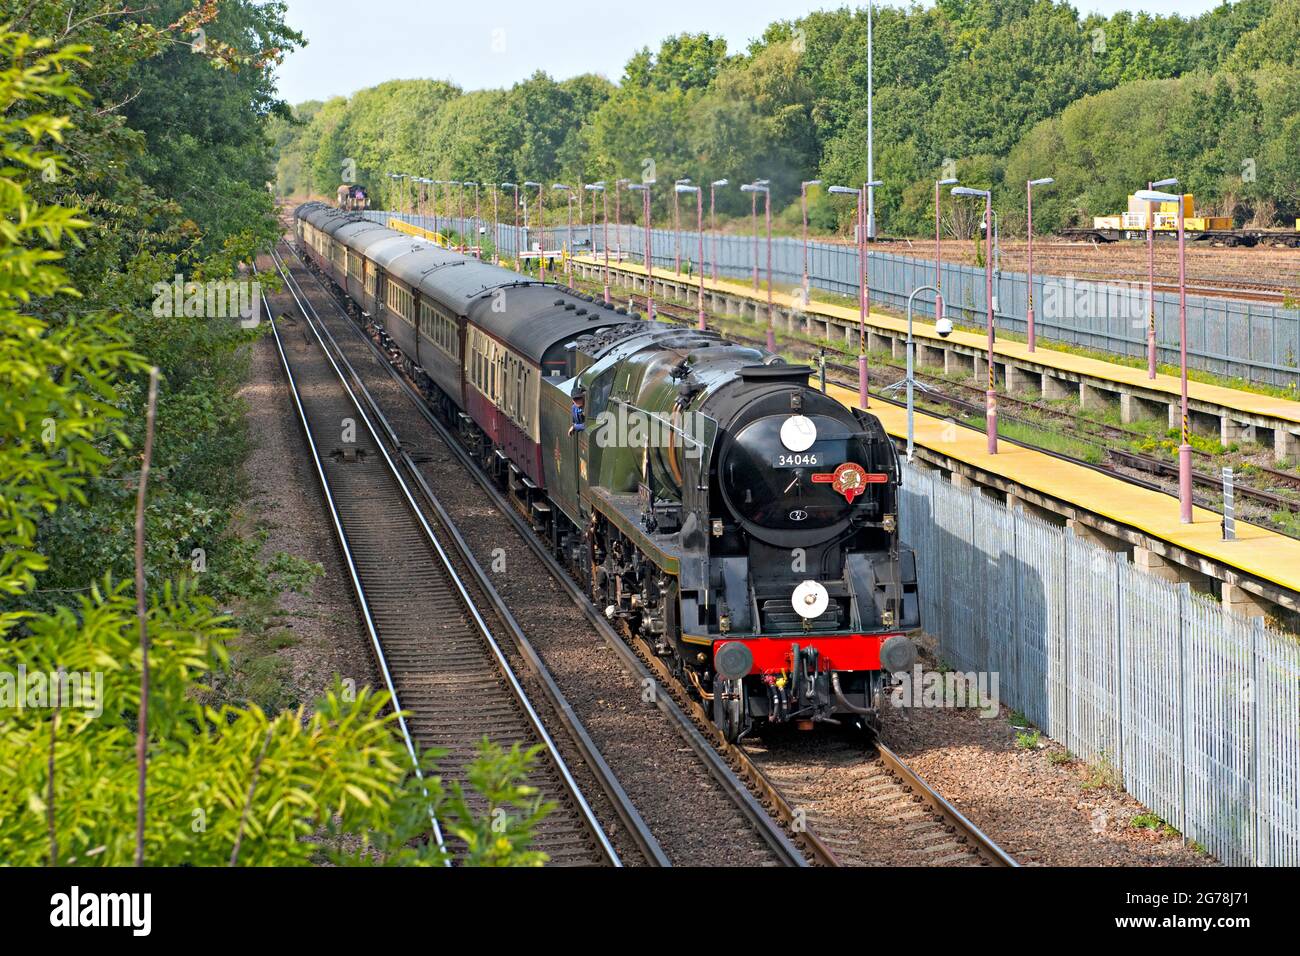 Preserved and restored steam locomotive, 34064 'Braunton' passes Tonbridge West railway yard with a special excursion train from London Stock Photo